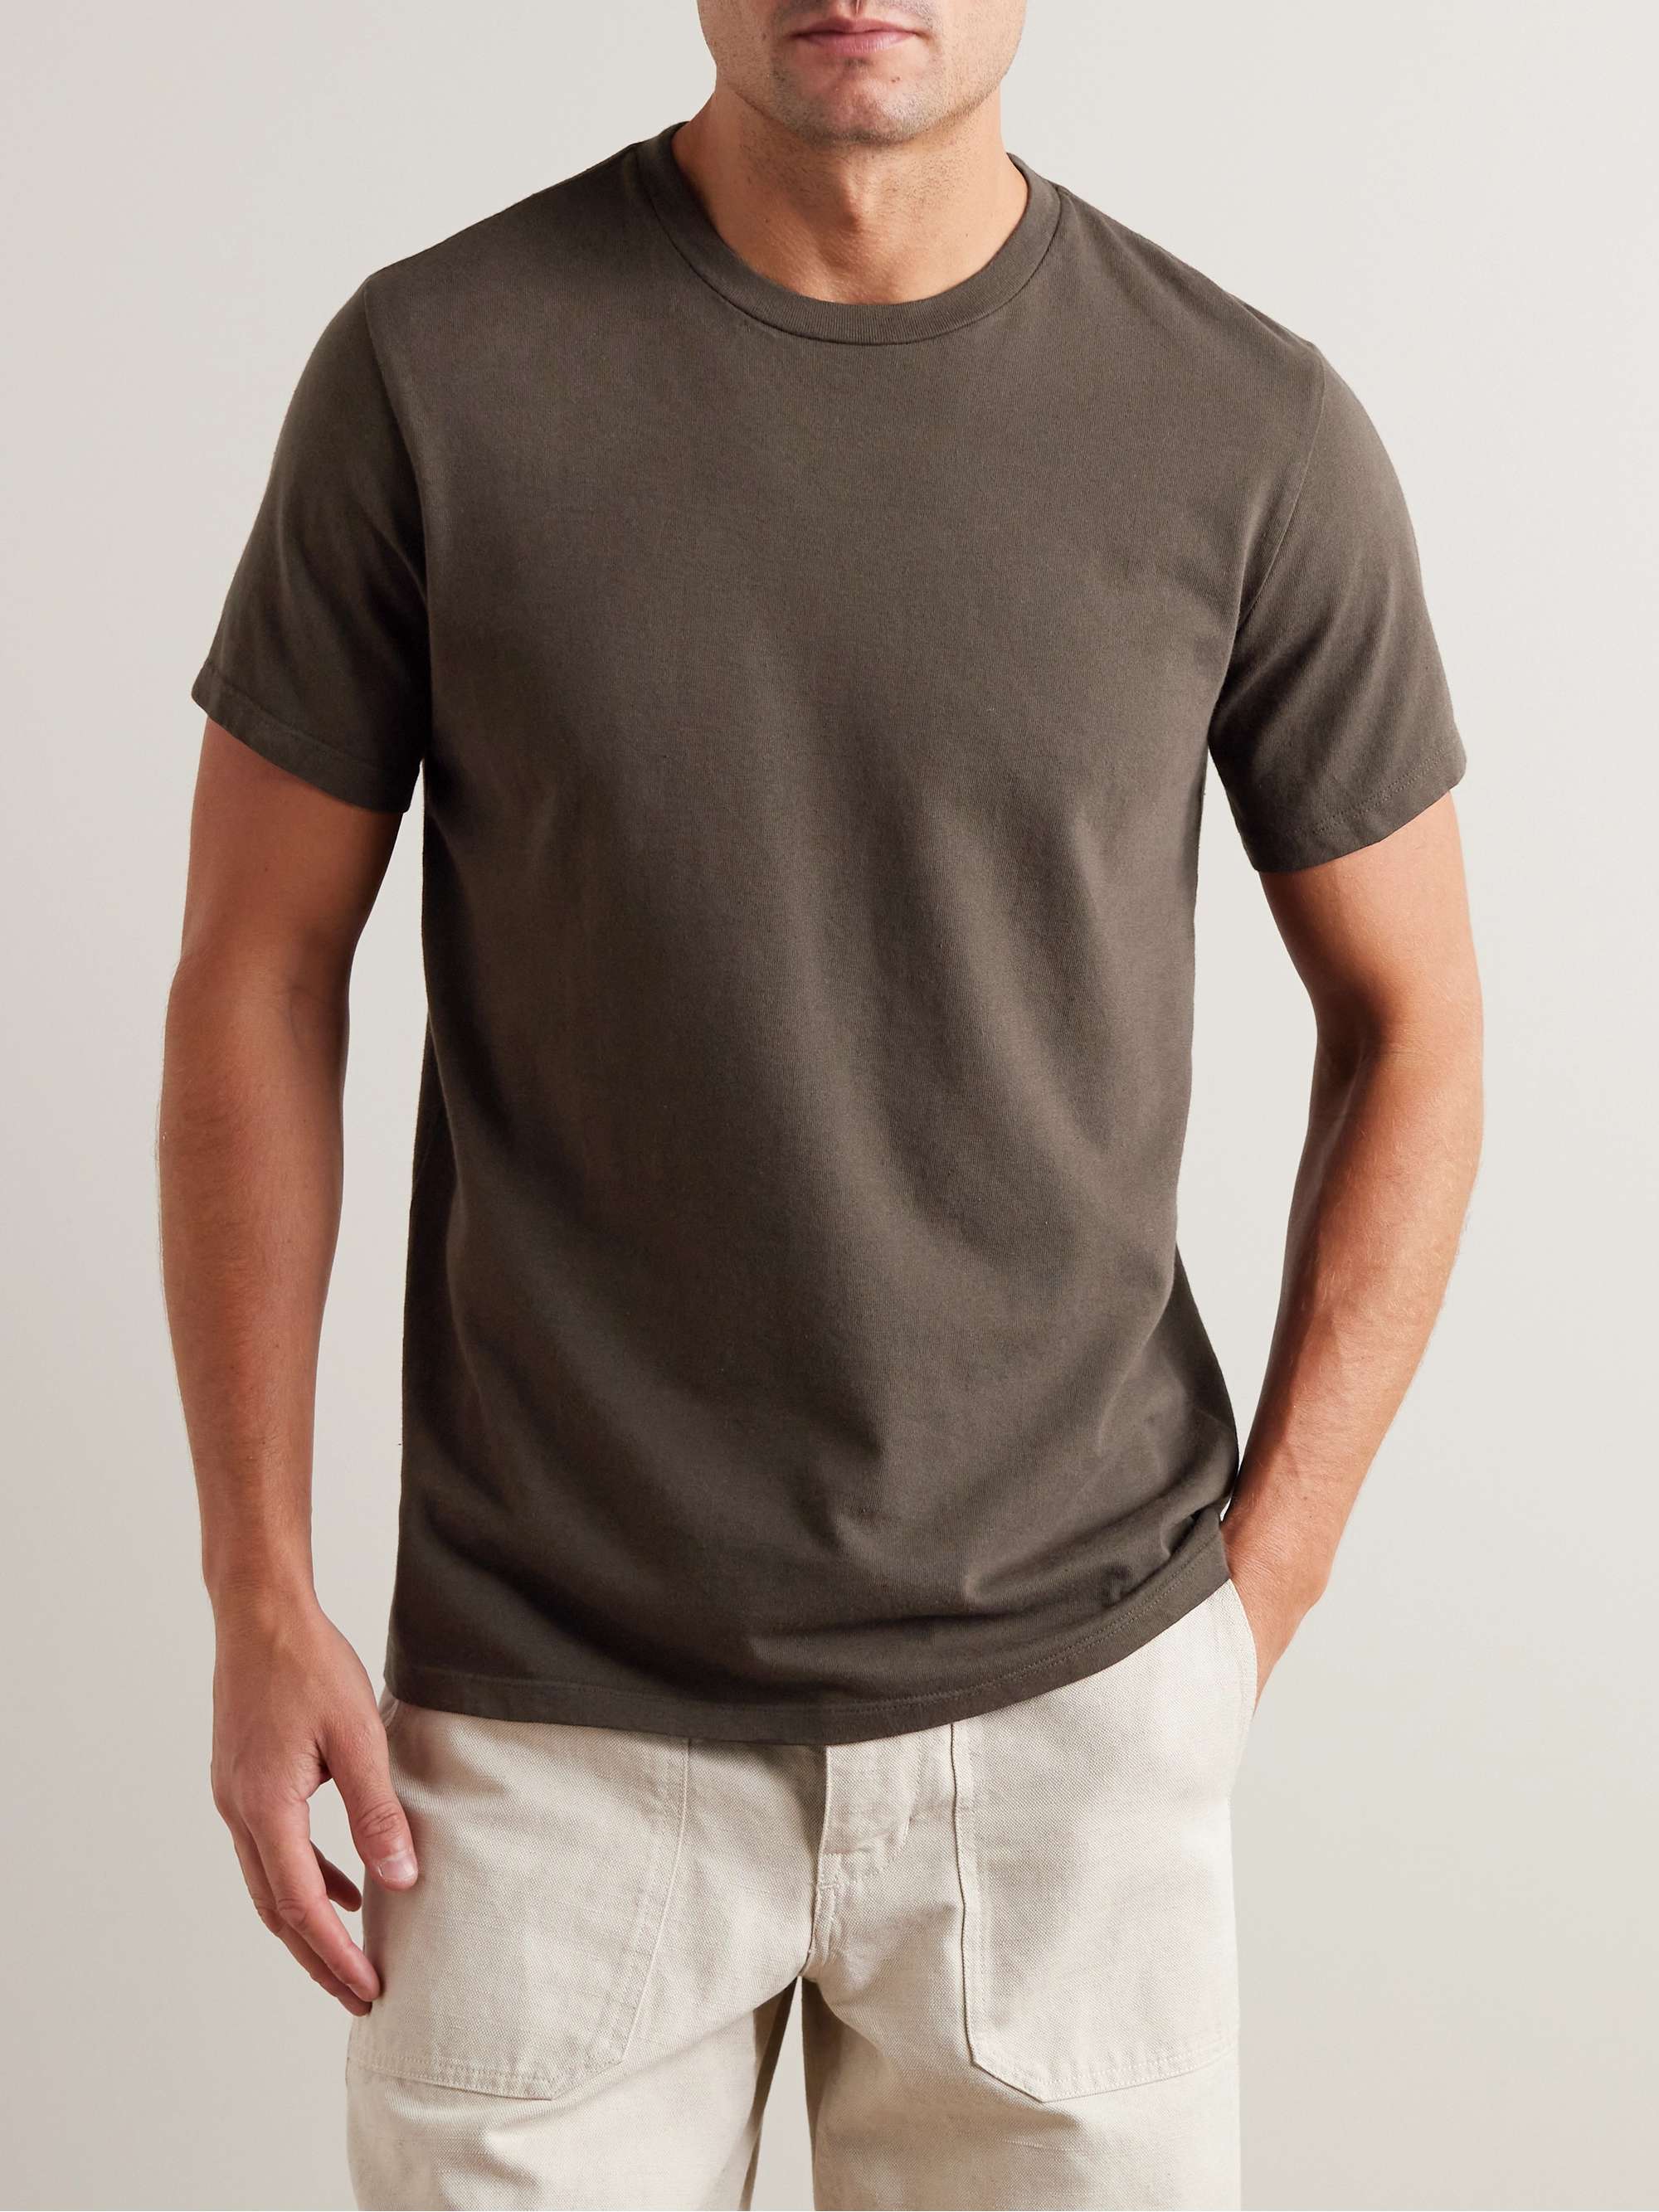 SAVE KHAKI UNITED Recycled and Organic Cotton-Jersey T-Shirt for Men ...